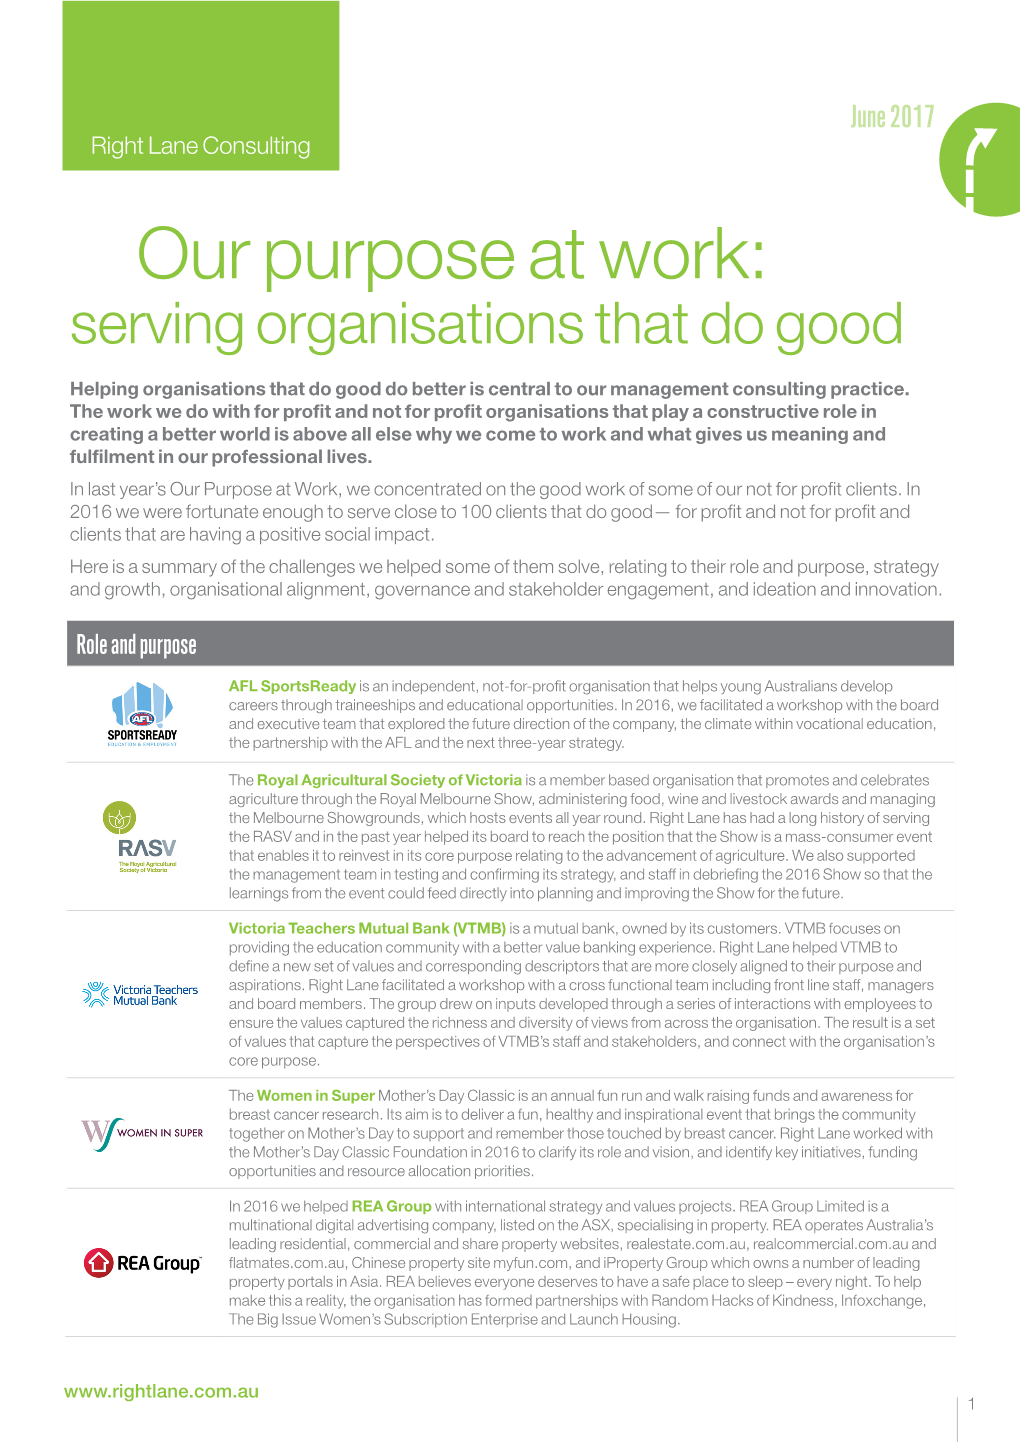 Our Purpose at Work: Serving Organisations That Do Good